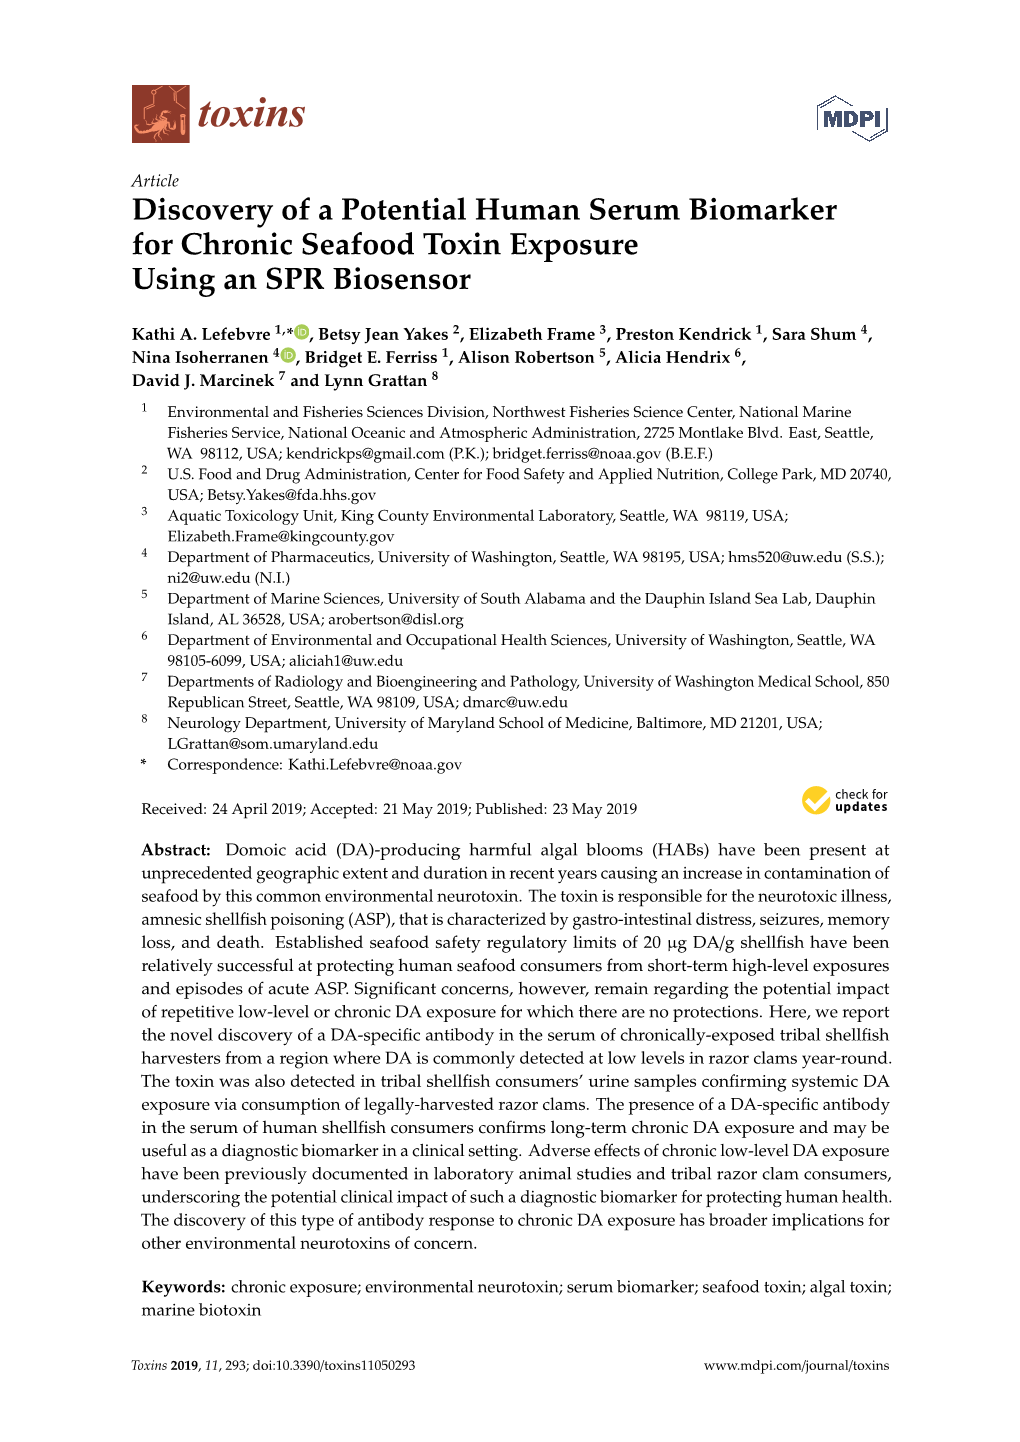 Discovery of a Potential Human Serum Biomarker for Chronic Seafood Toxin Exposure Using an SPR Biosensor